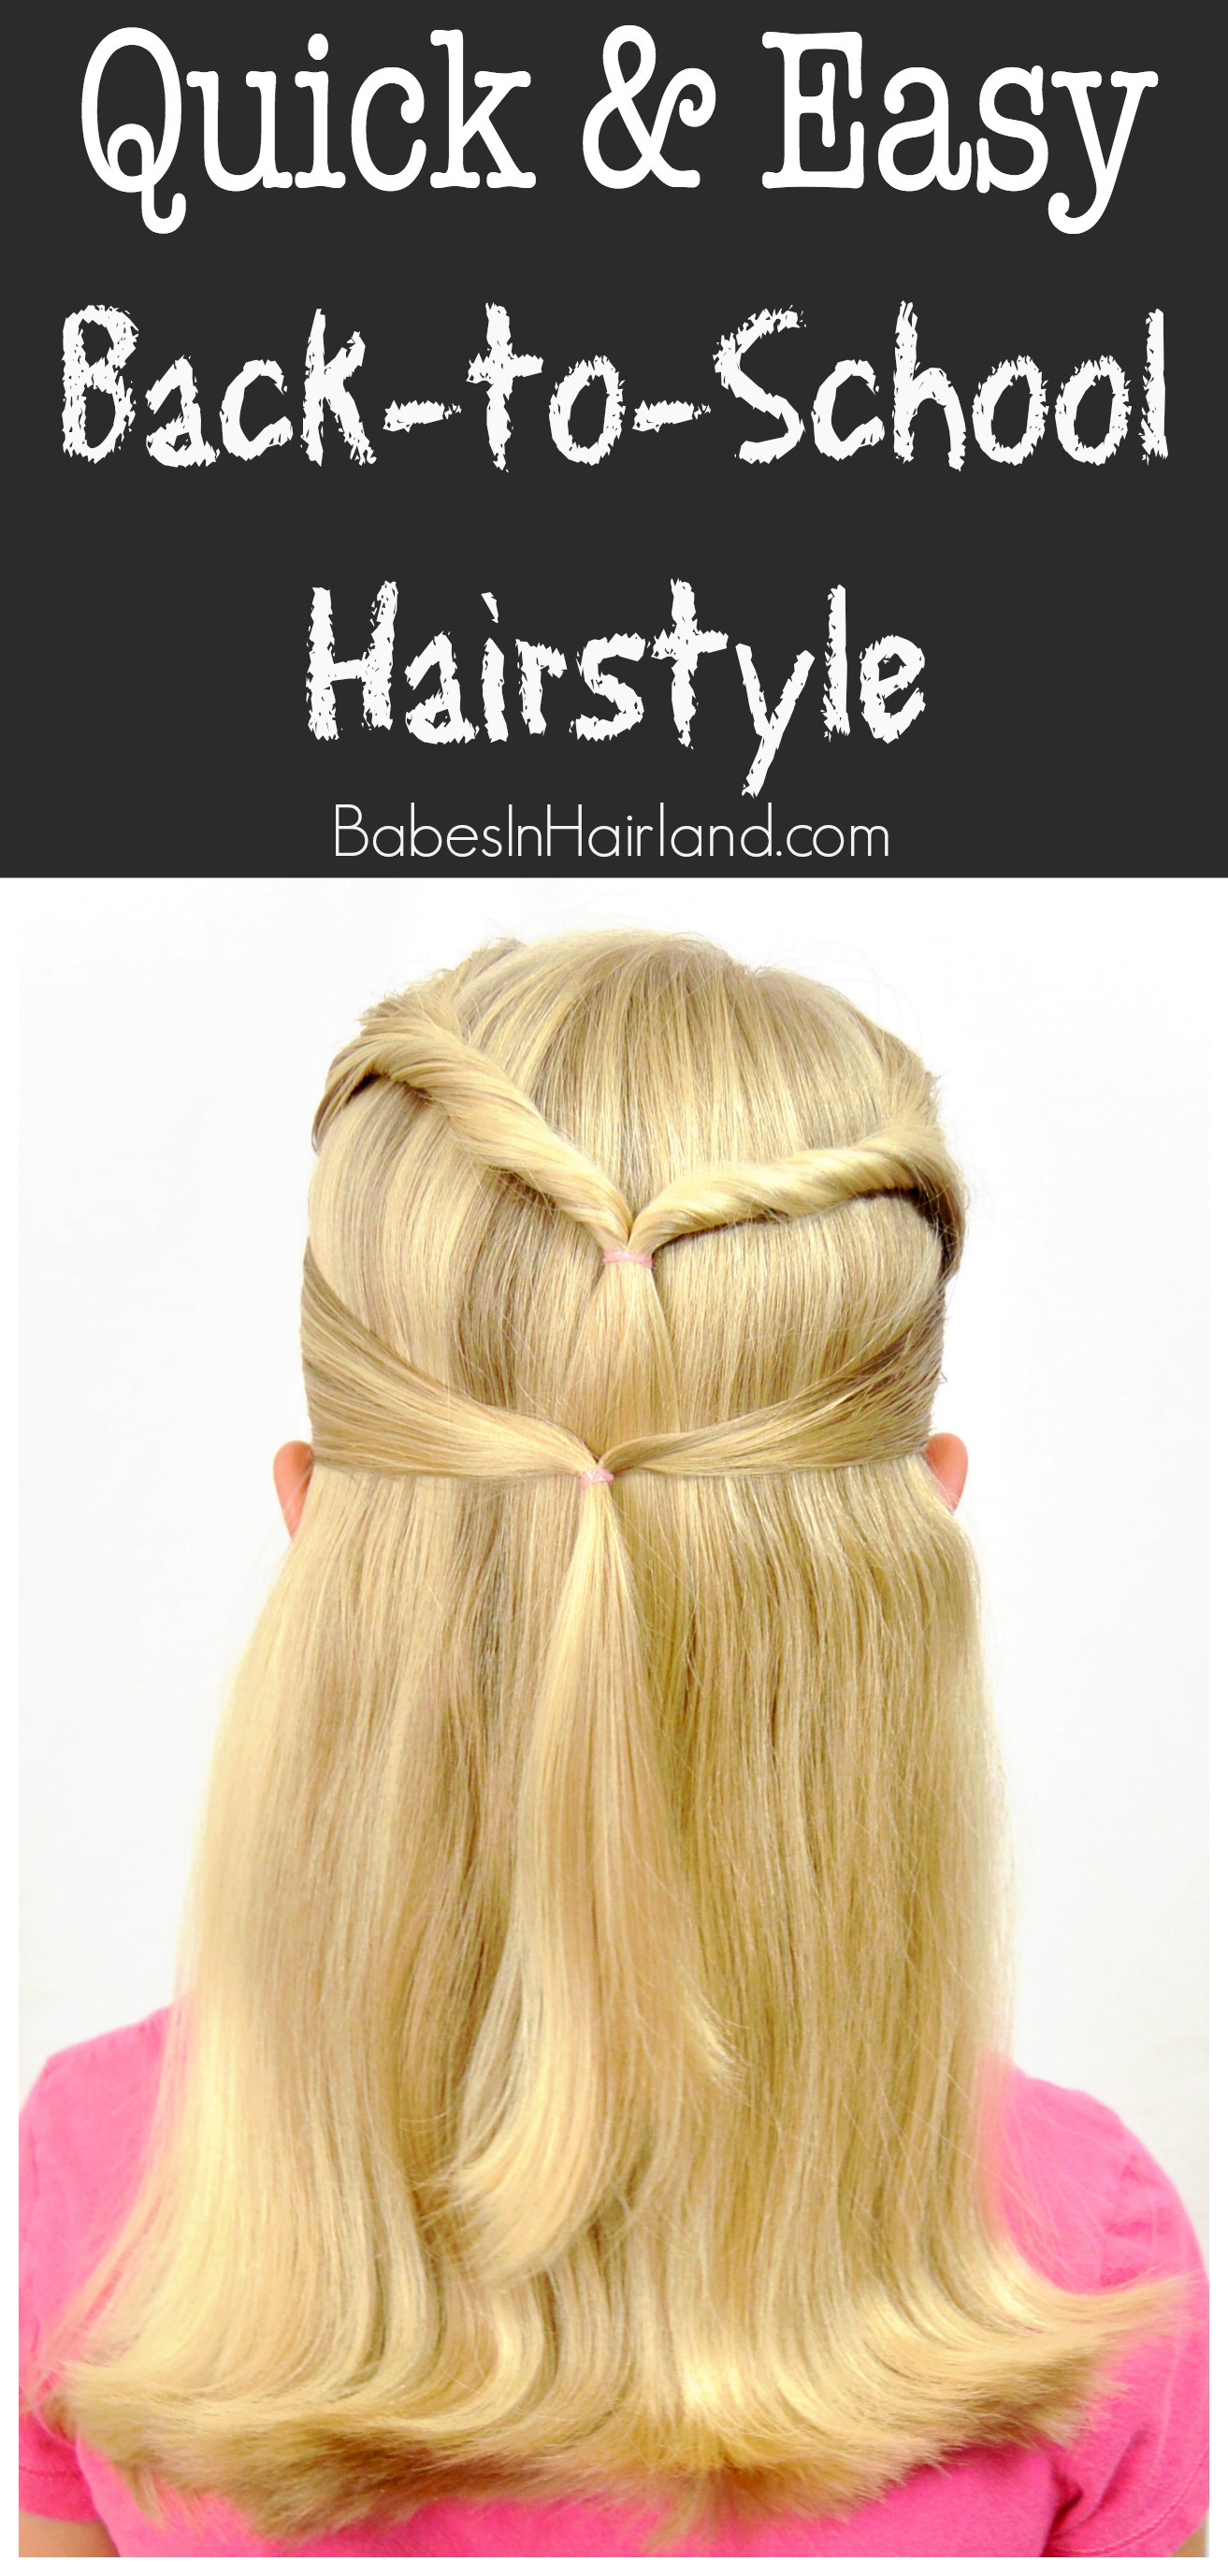 Quick Easy Back To School Hairstyle From Babesinhairland